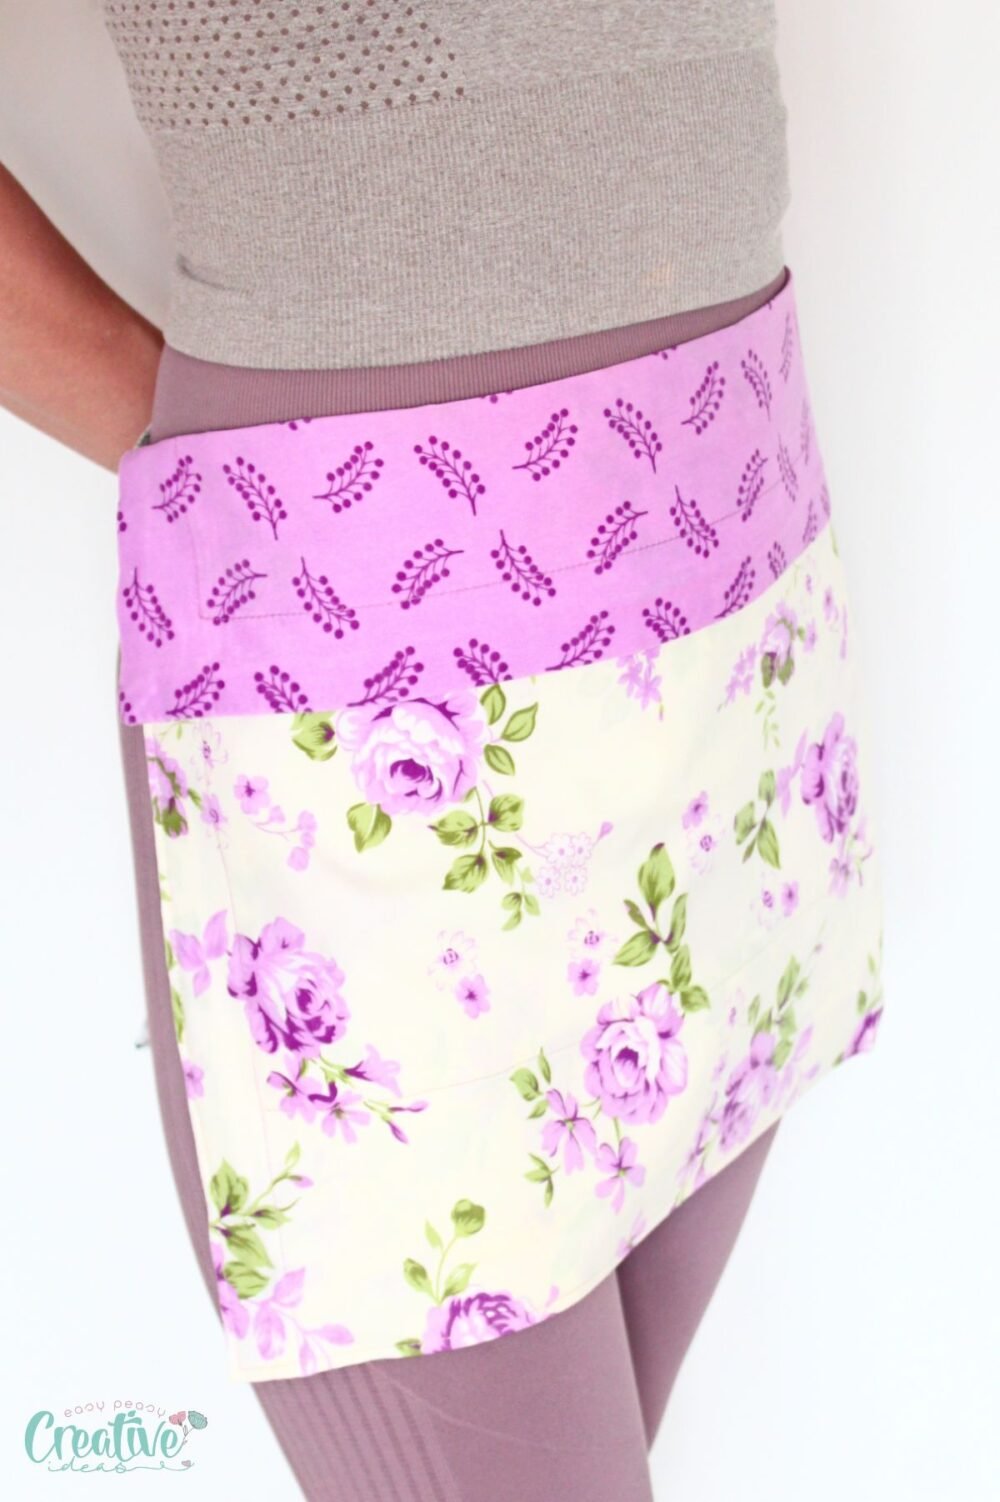 This straightforward easy to sew apron is ideal for those who enjoy sewing and look for a quick, satisfying endeavor.